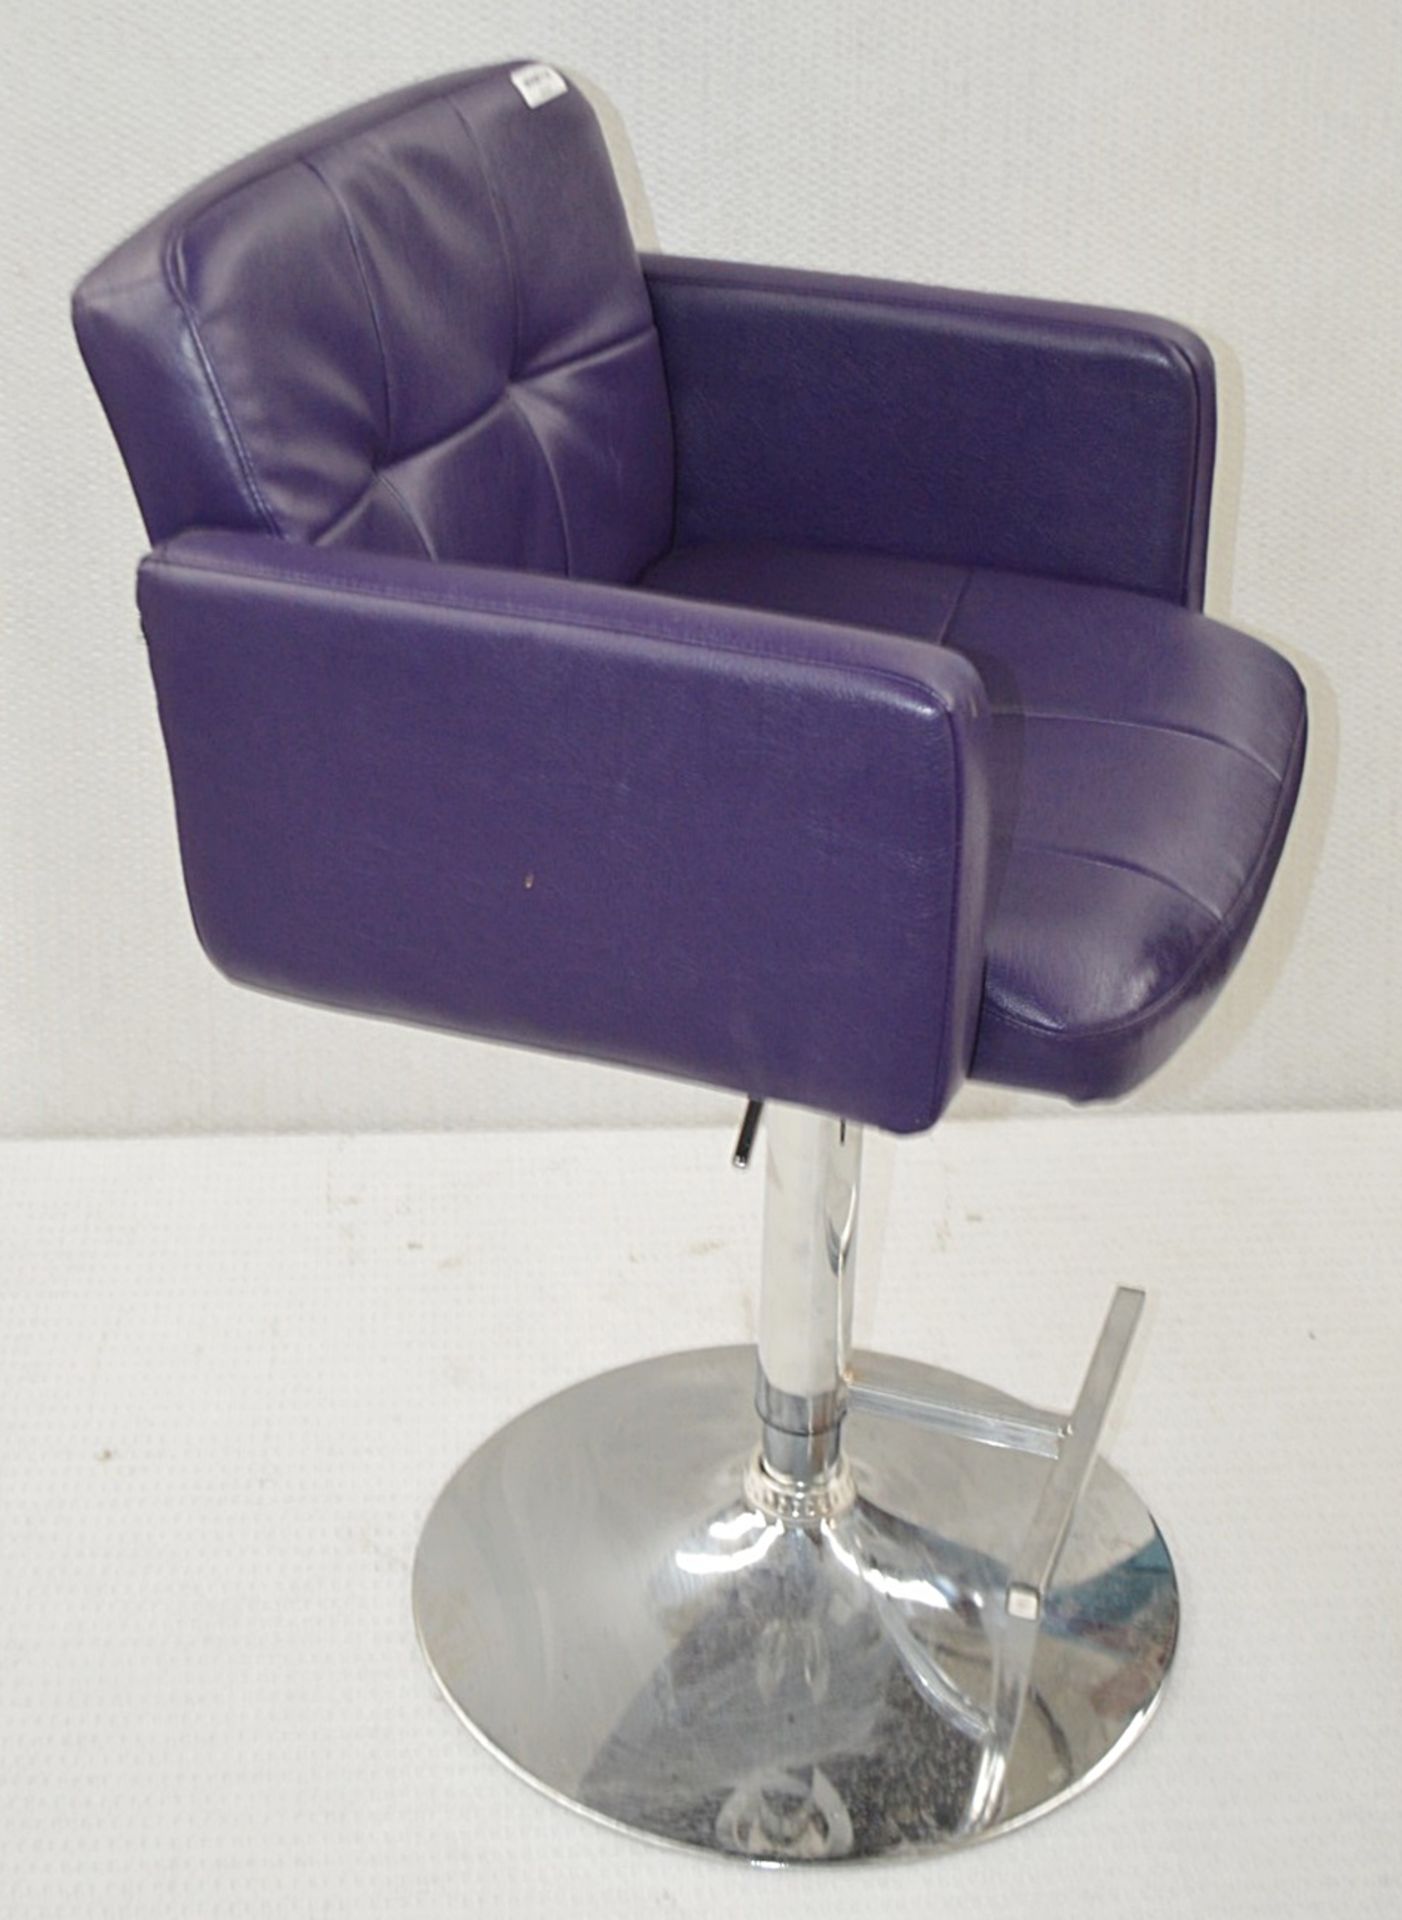 1 x URBAN DECAY Branded Gas-Lift Beauty Salon Swivel Chair With Foot Plate - Upholstered In Purple - Image 2 of 6